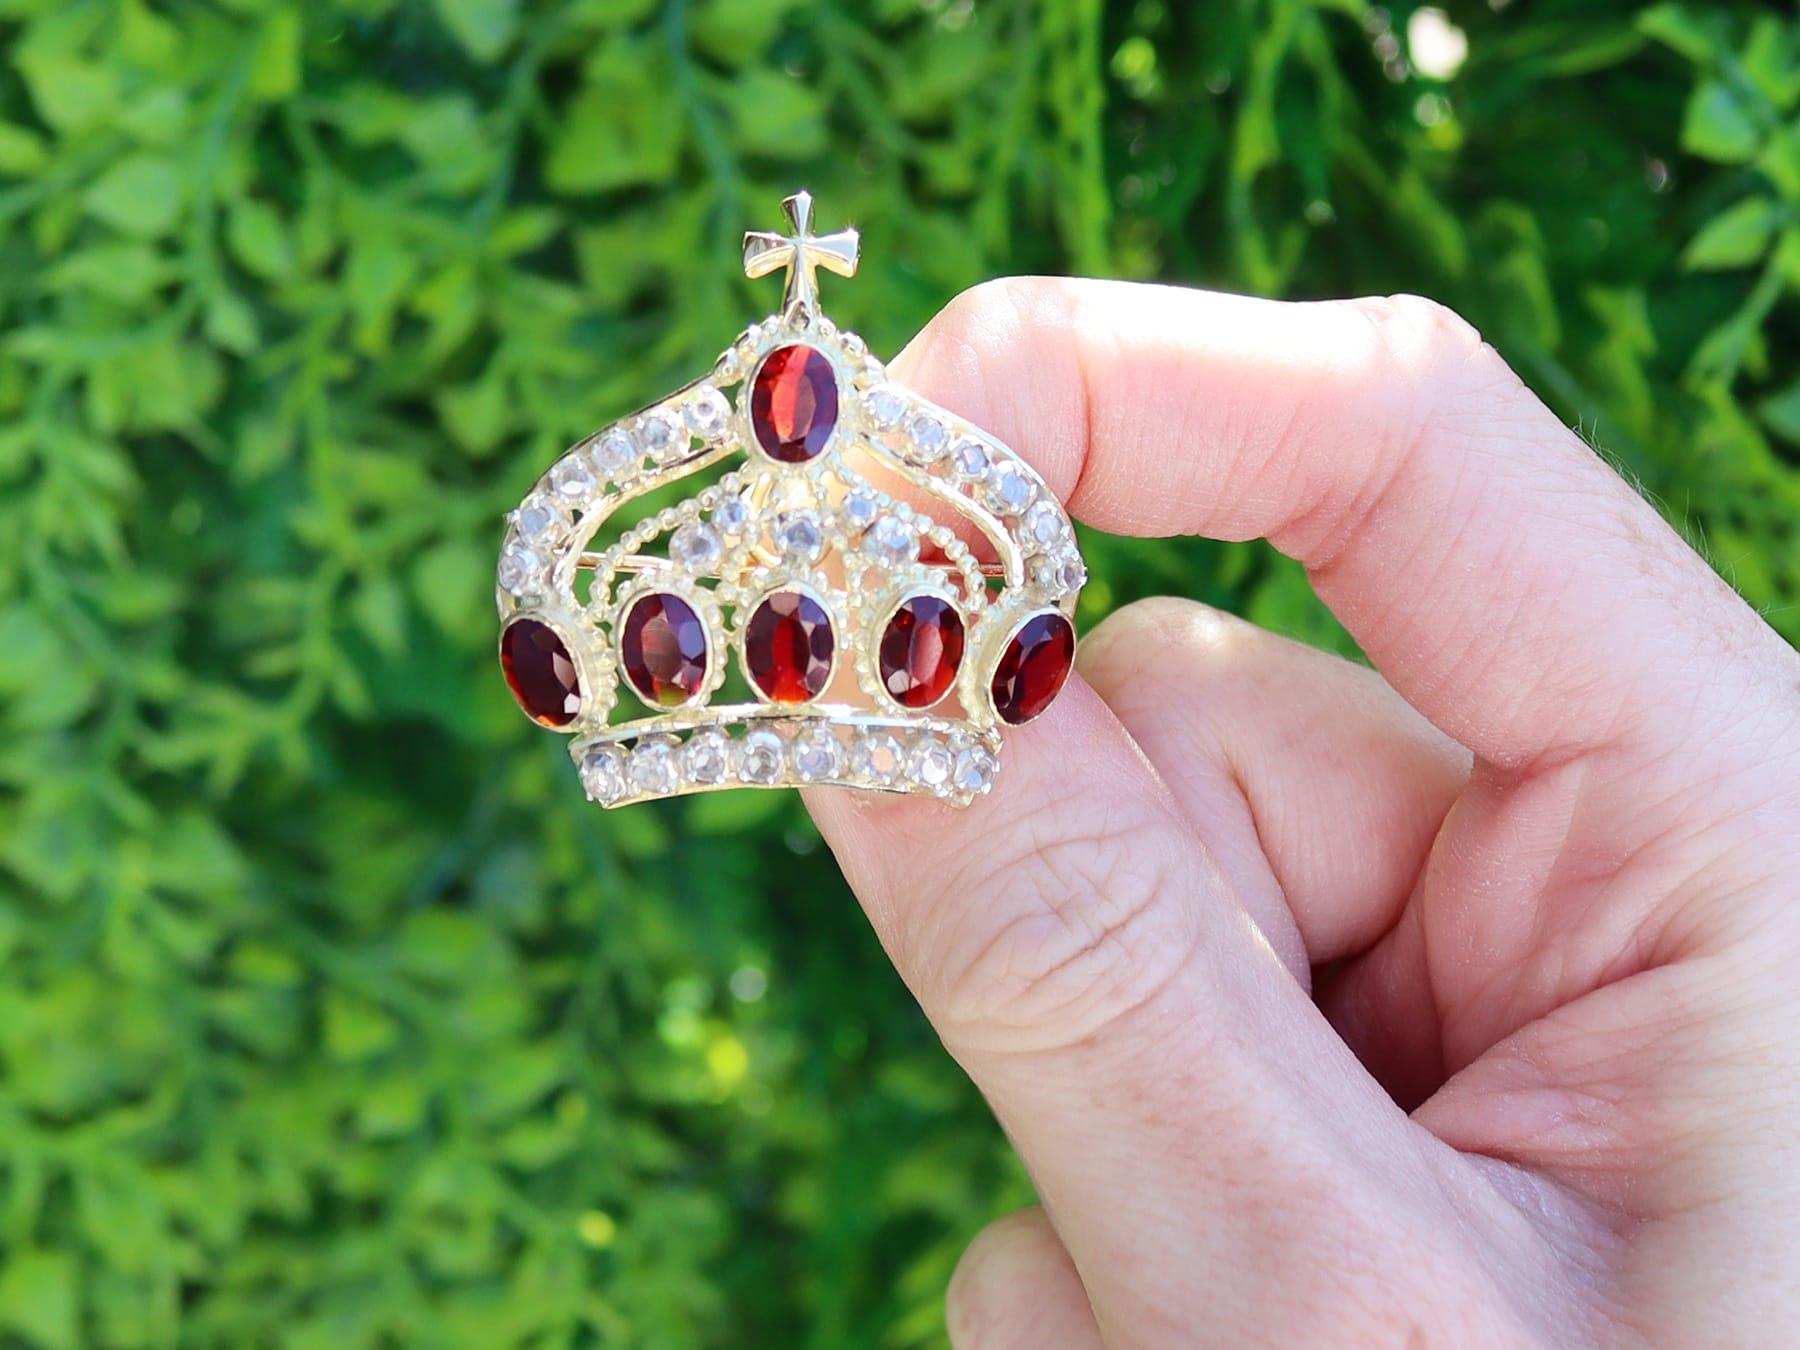 A fine and impressive vintage 3.60 carat garnet, 0.78 carat diamond and 15 karat yellow gold and silver set crown brooch/pendant; part of our vintage brooches collection

This stunning, fine and impressive garnet brooch/pendant has been crafted in